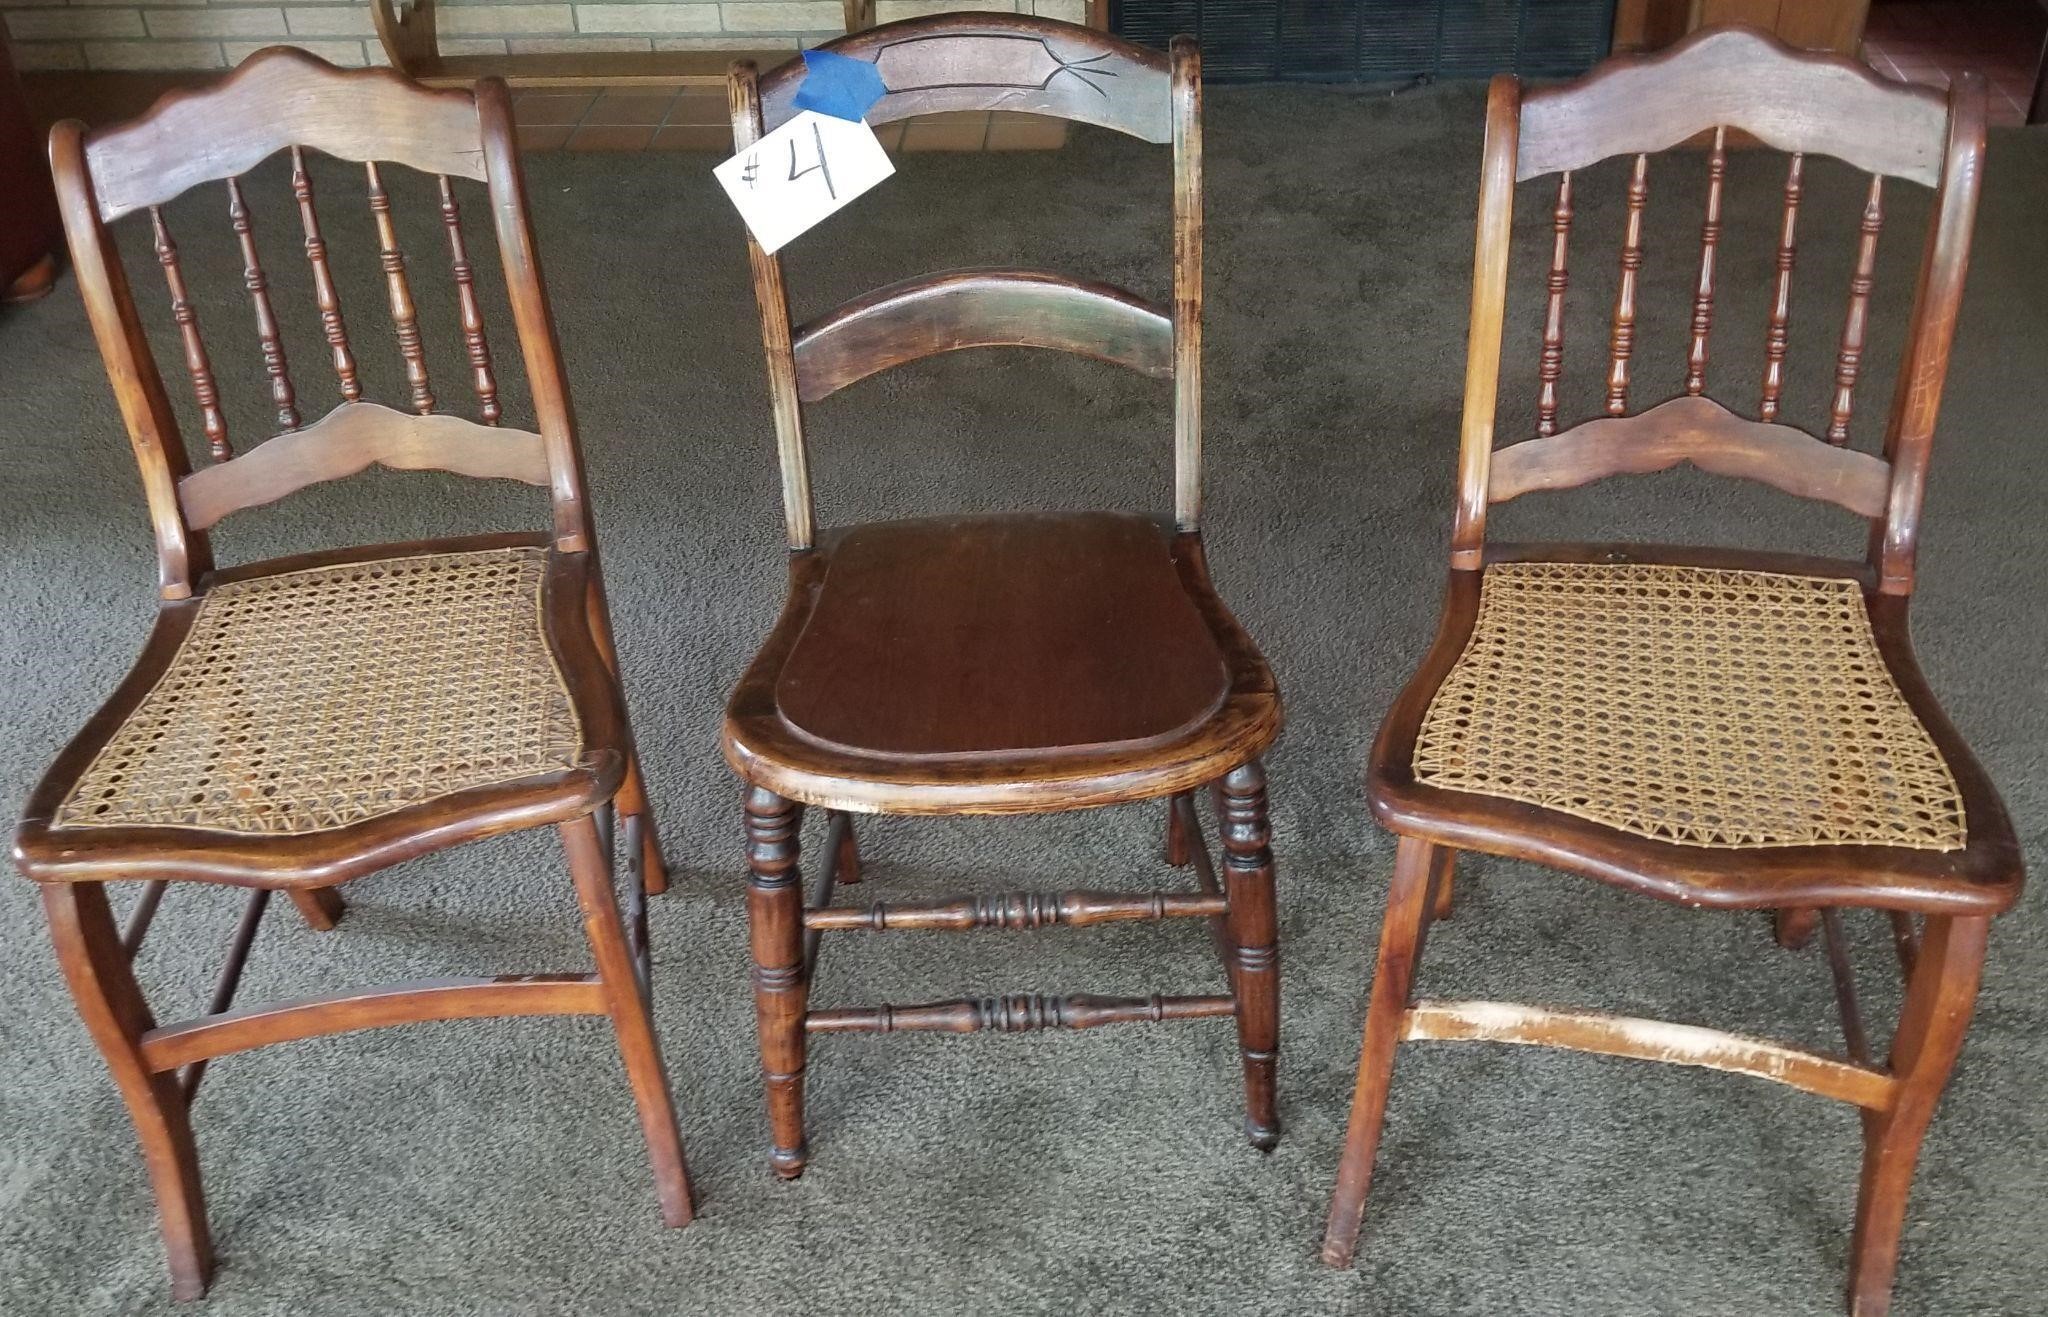 3 Antique Chairs-one has dog chew marks